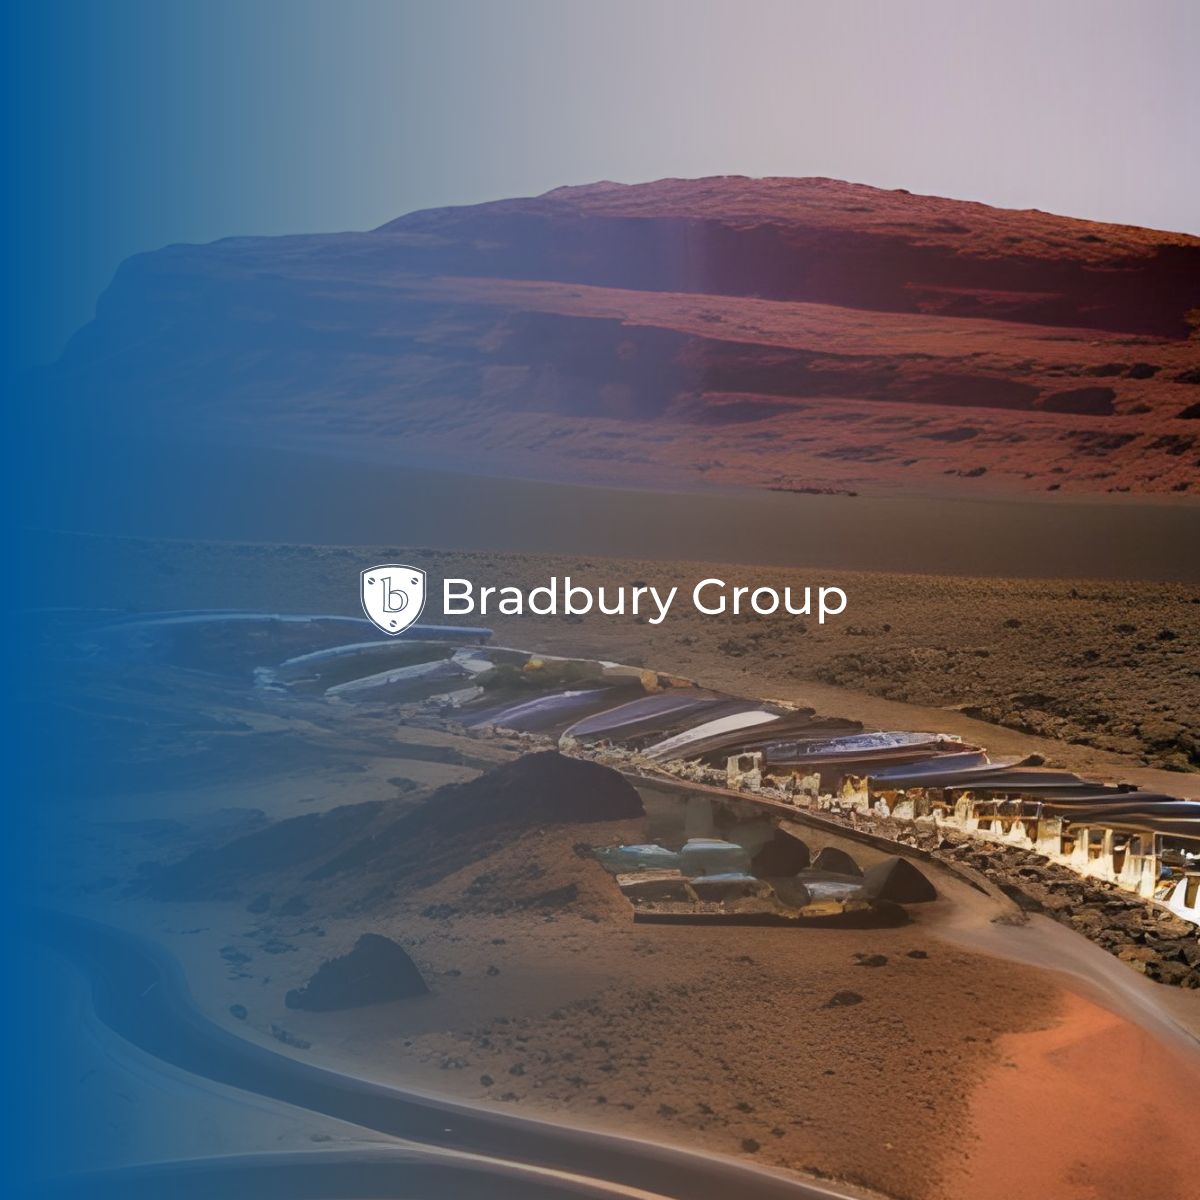 An edit of life on Mars' surface with the Bradbury Group logo in front of the image.